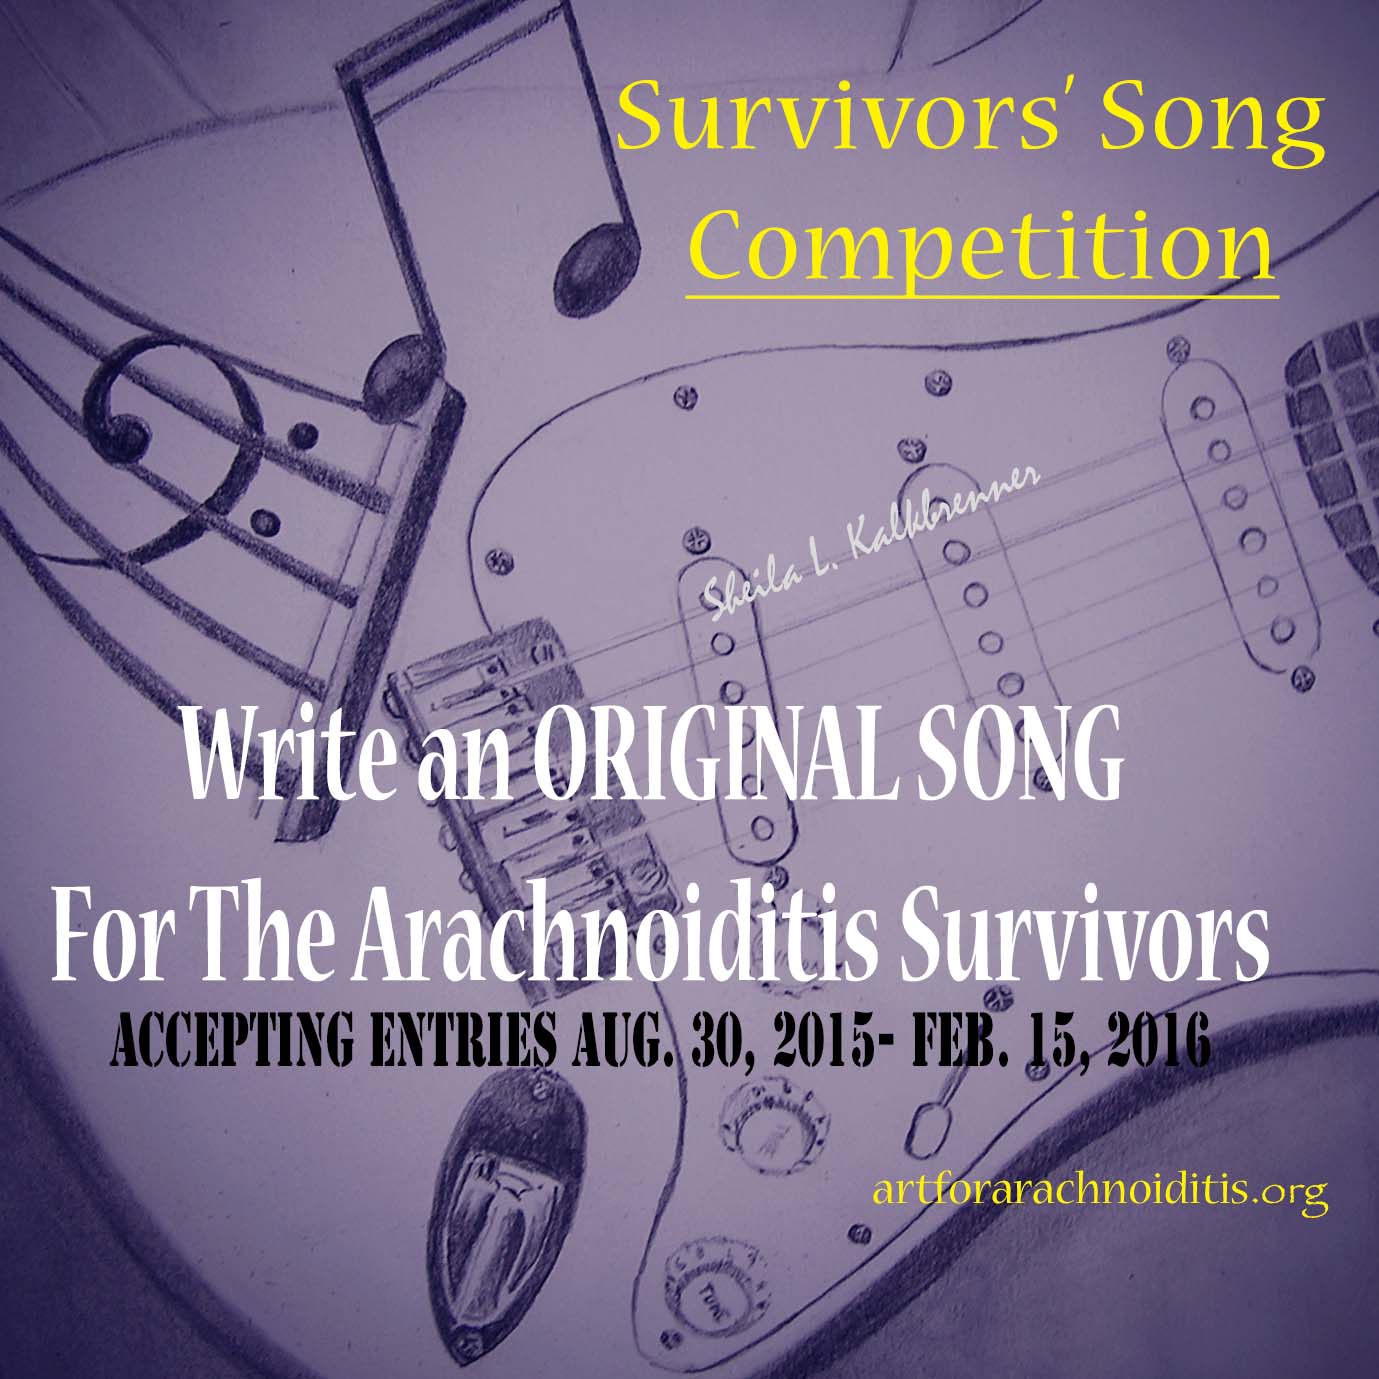 The Song Search is open to anyone interested in creating a song to inspire these hidden heroes living with spinal arachnoiditis. Registration info: http://artforarachnoiditis.org/2015/04/06/2015-2016-art-by-arachnoiditis-survivors-registration-form/